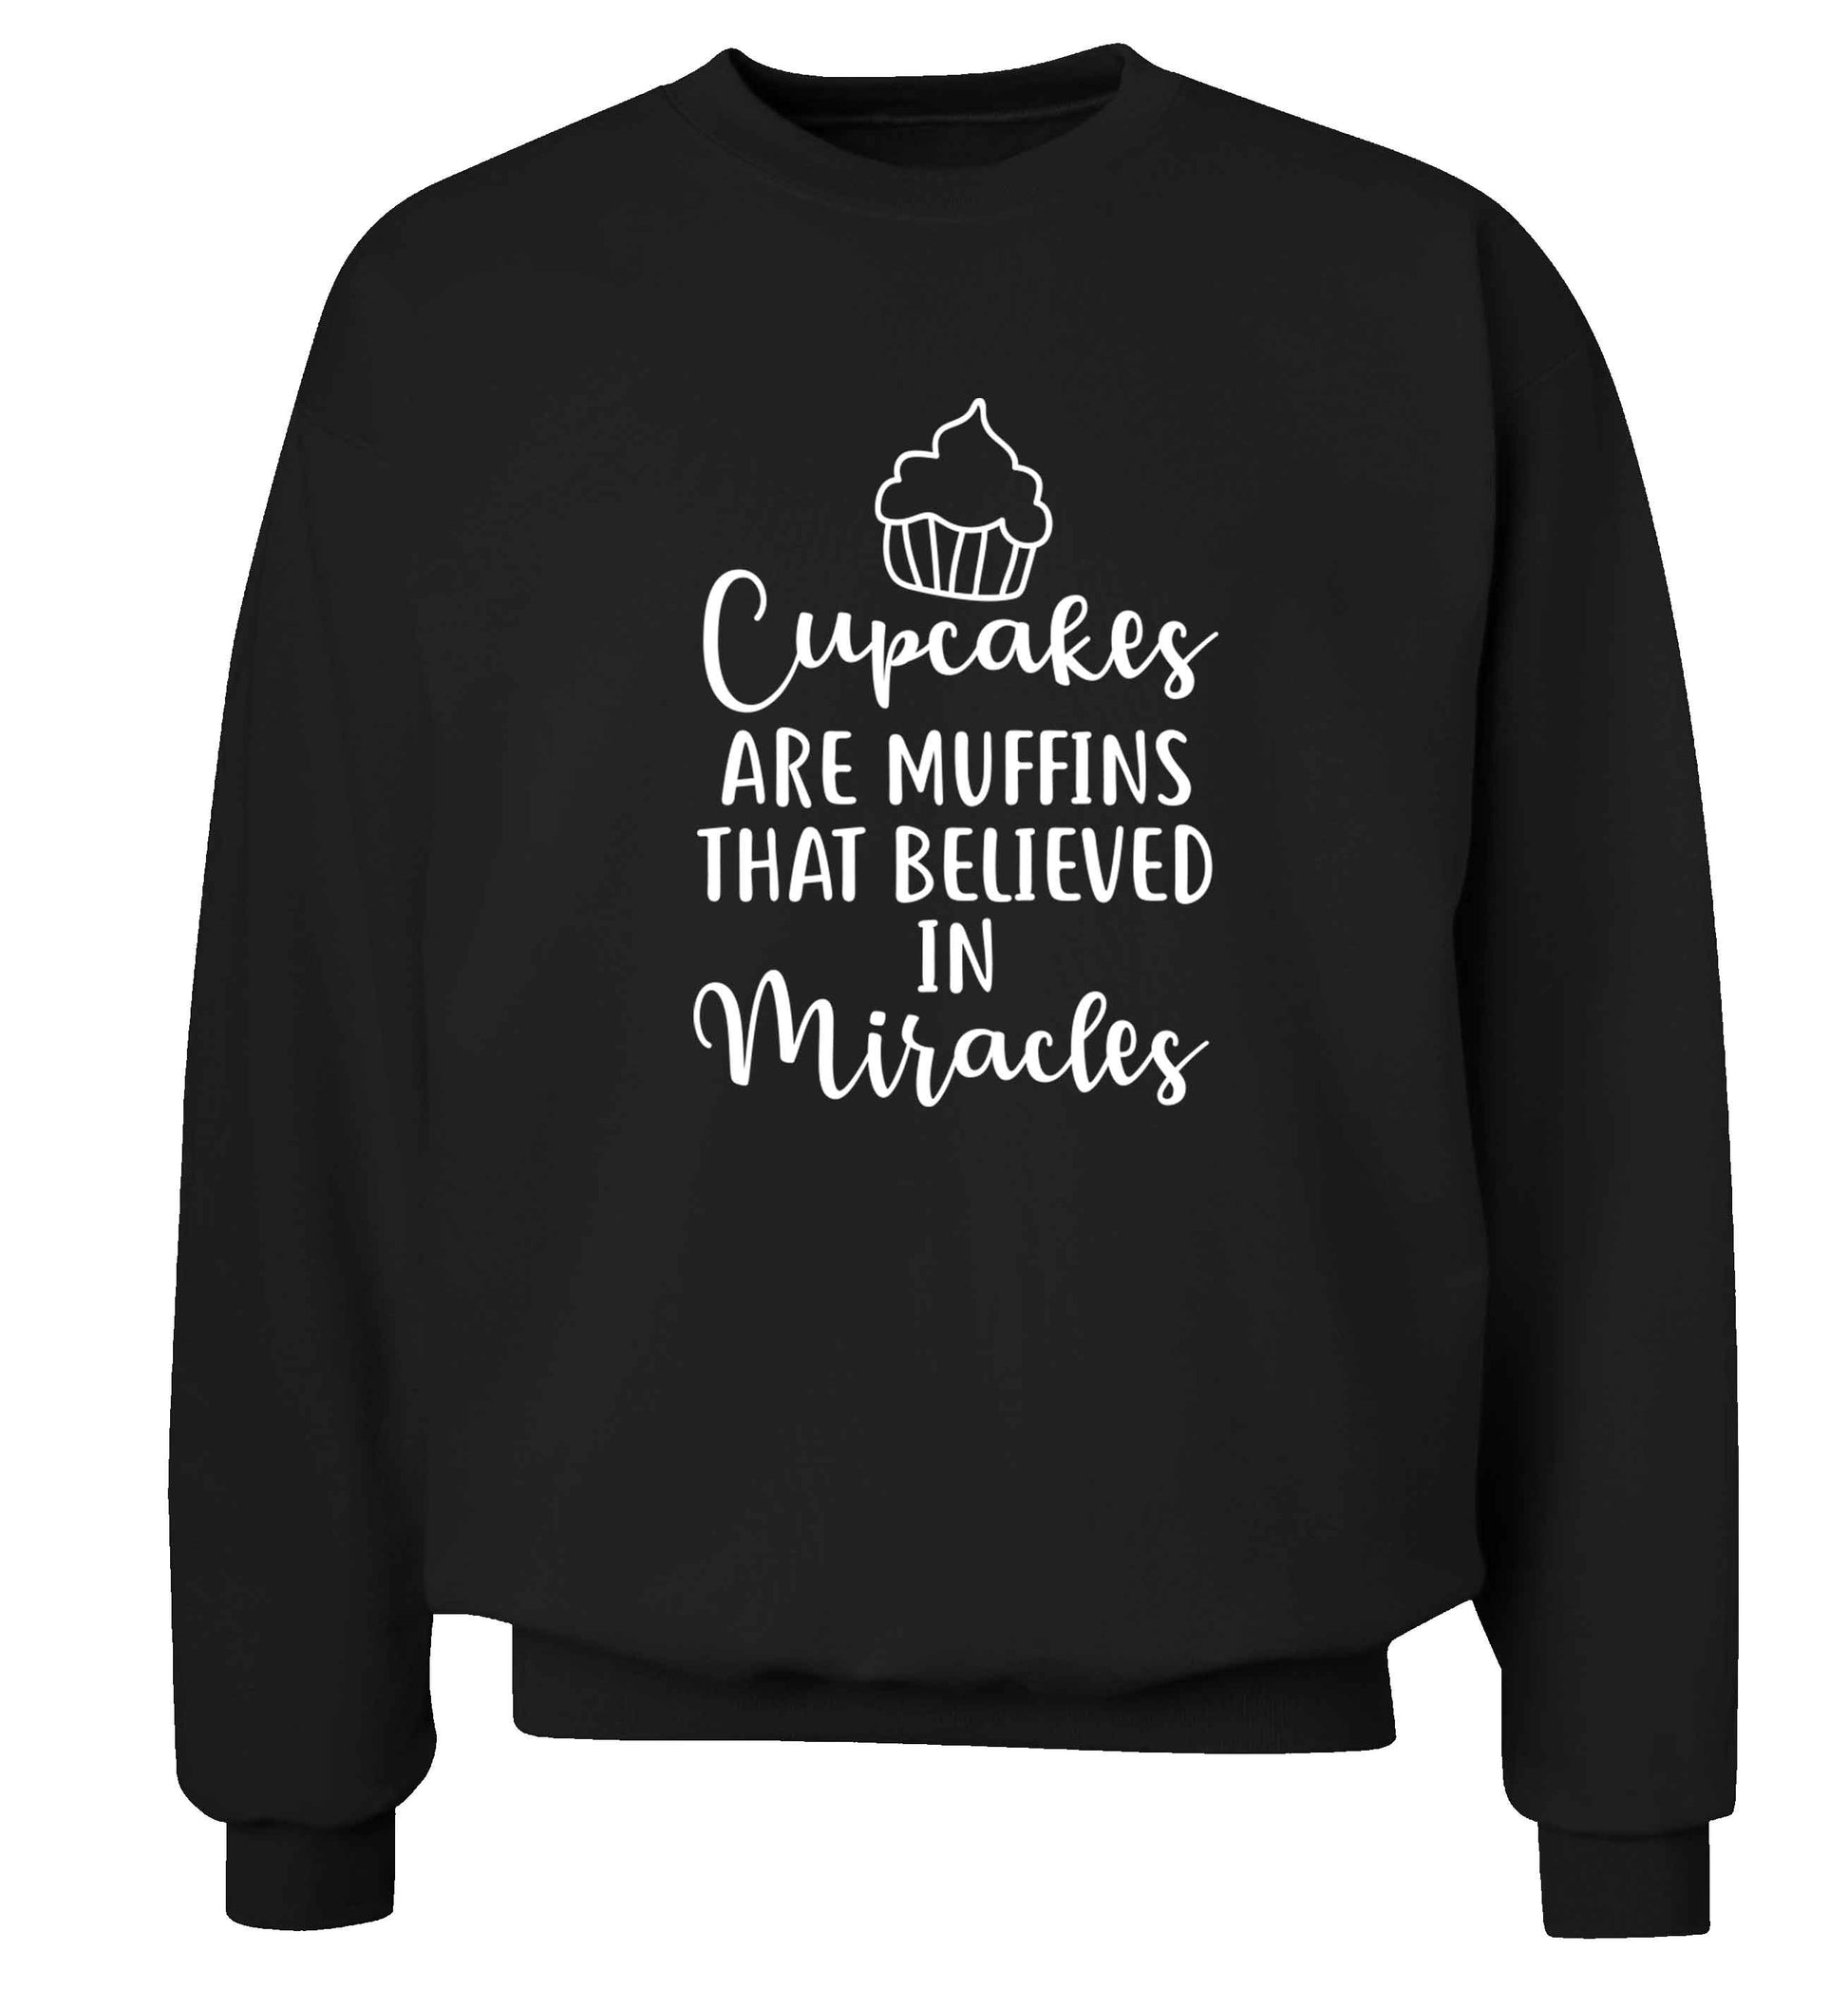 Cupcakes muffins that believed in miracles Adult's unisex black Sweater 2XL